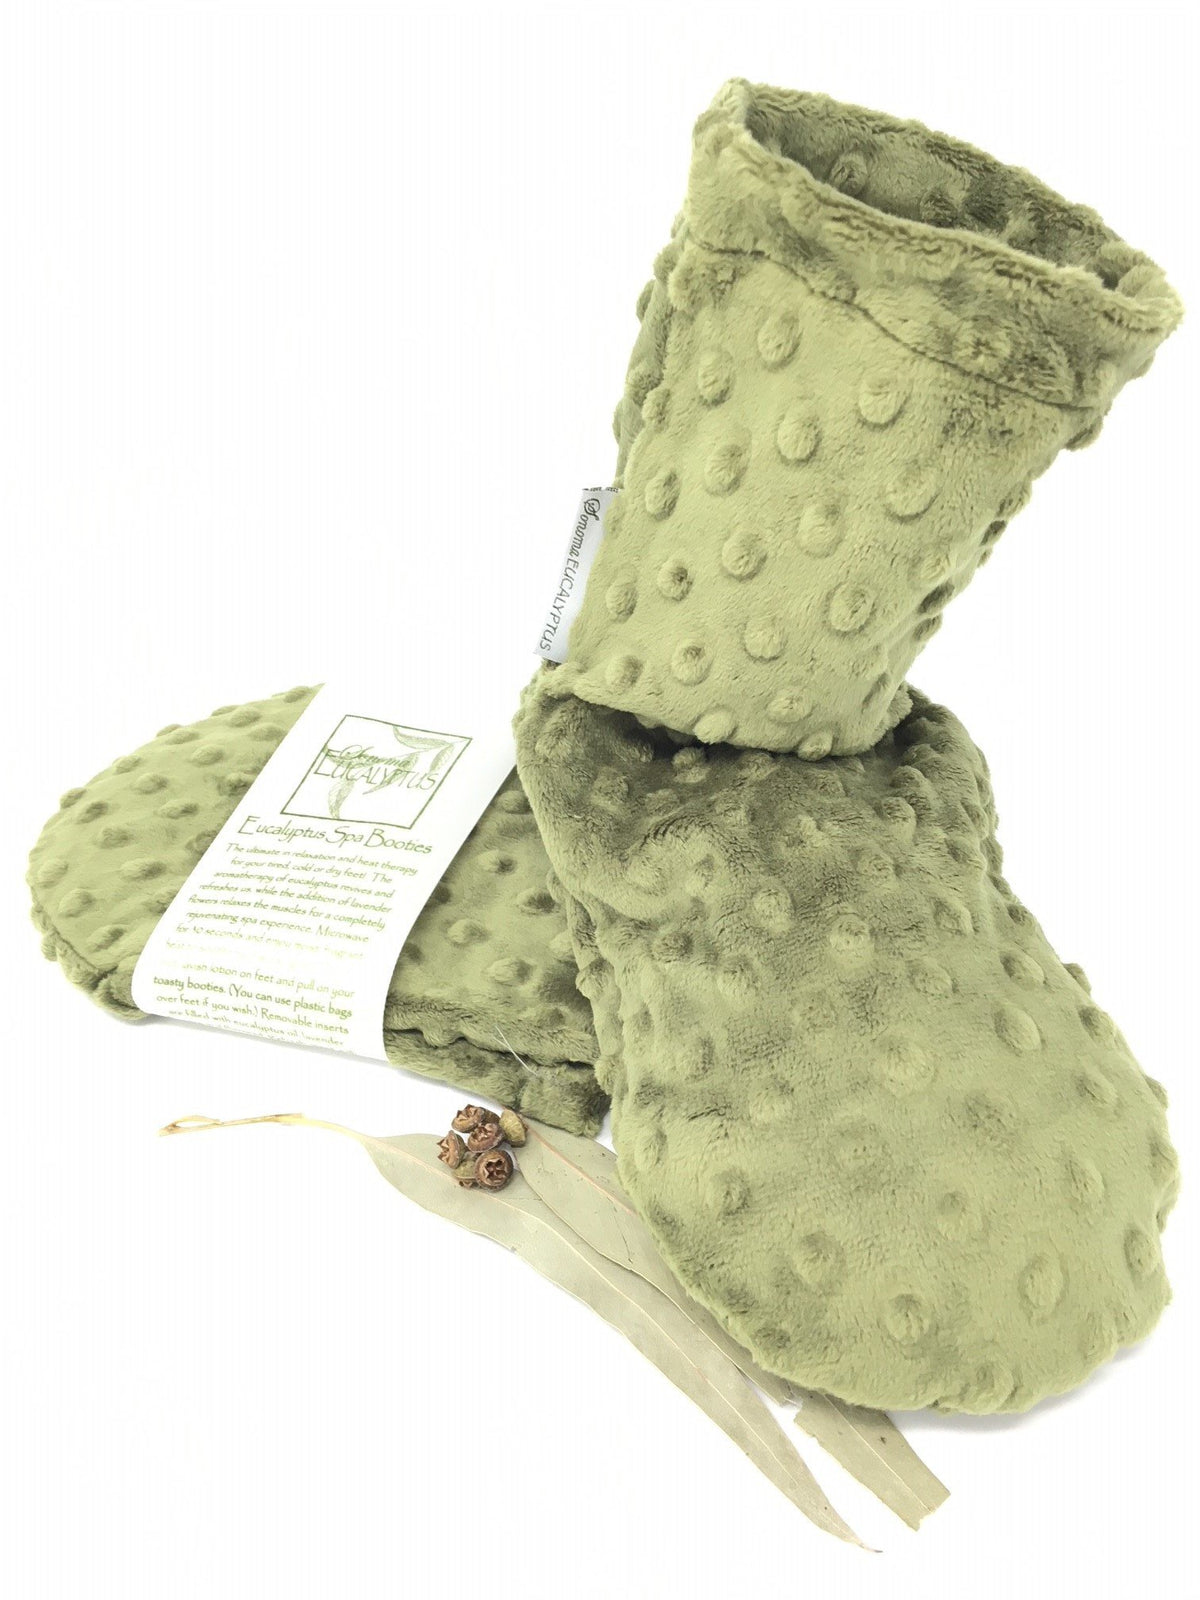 A pair of Sonoma Lavender Sonoma Eucalyptus Spa Green Dot Booties with a dotted texture, displayed with a product tag, isolated on a white background.